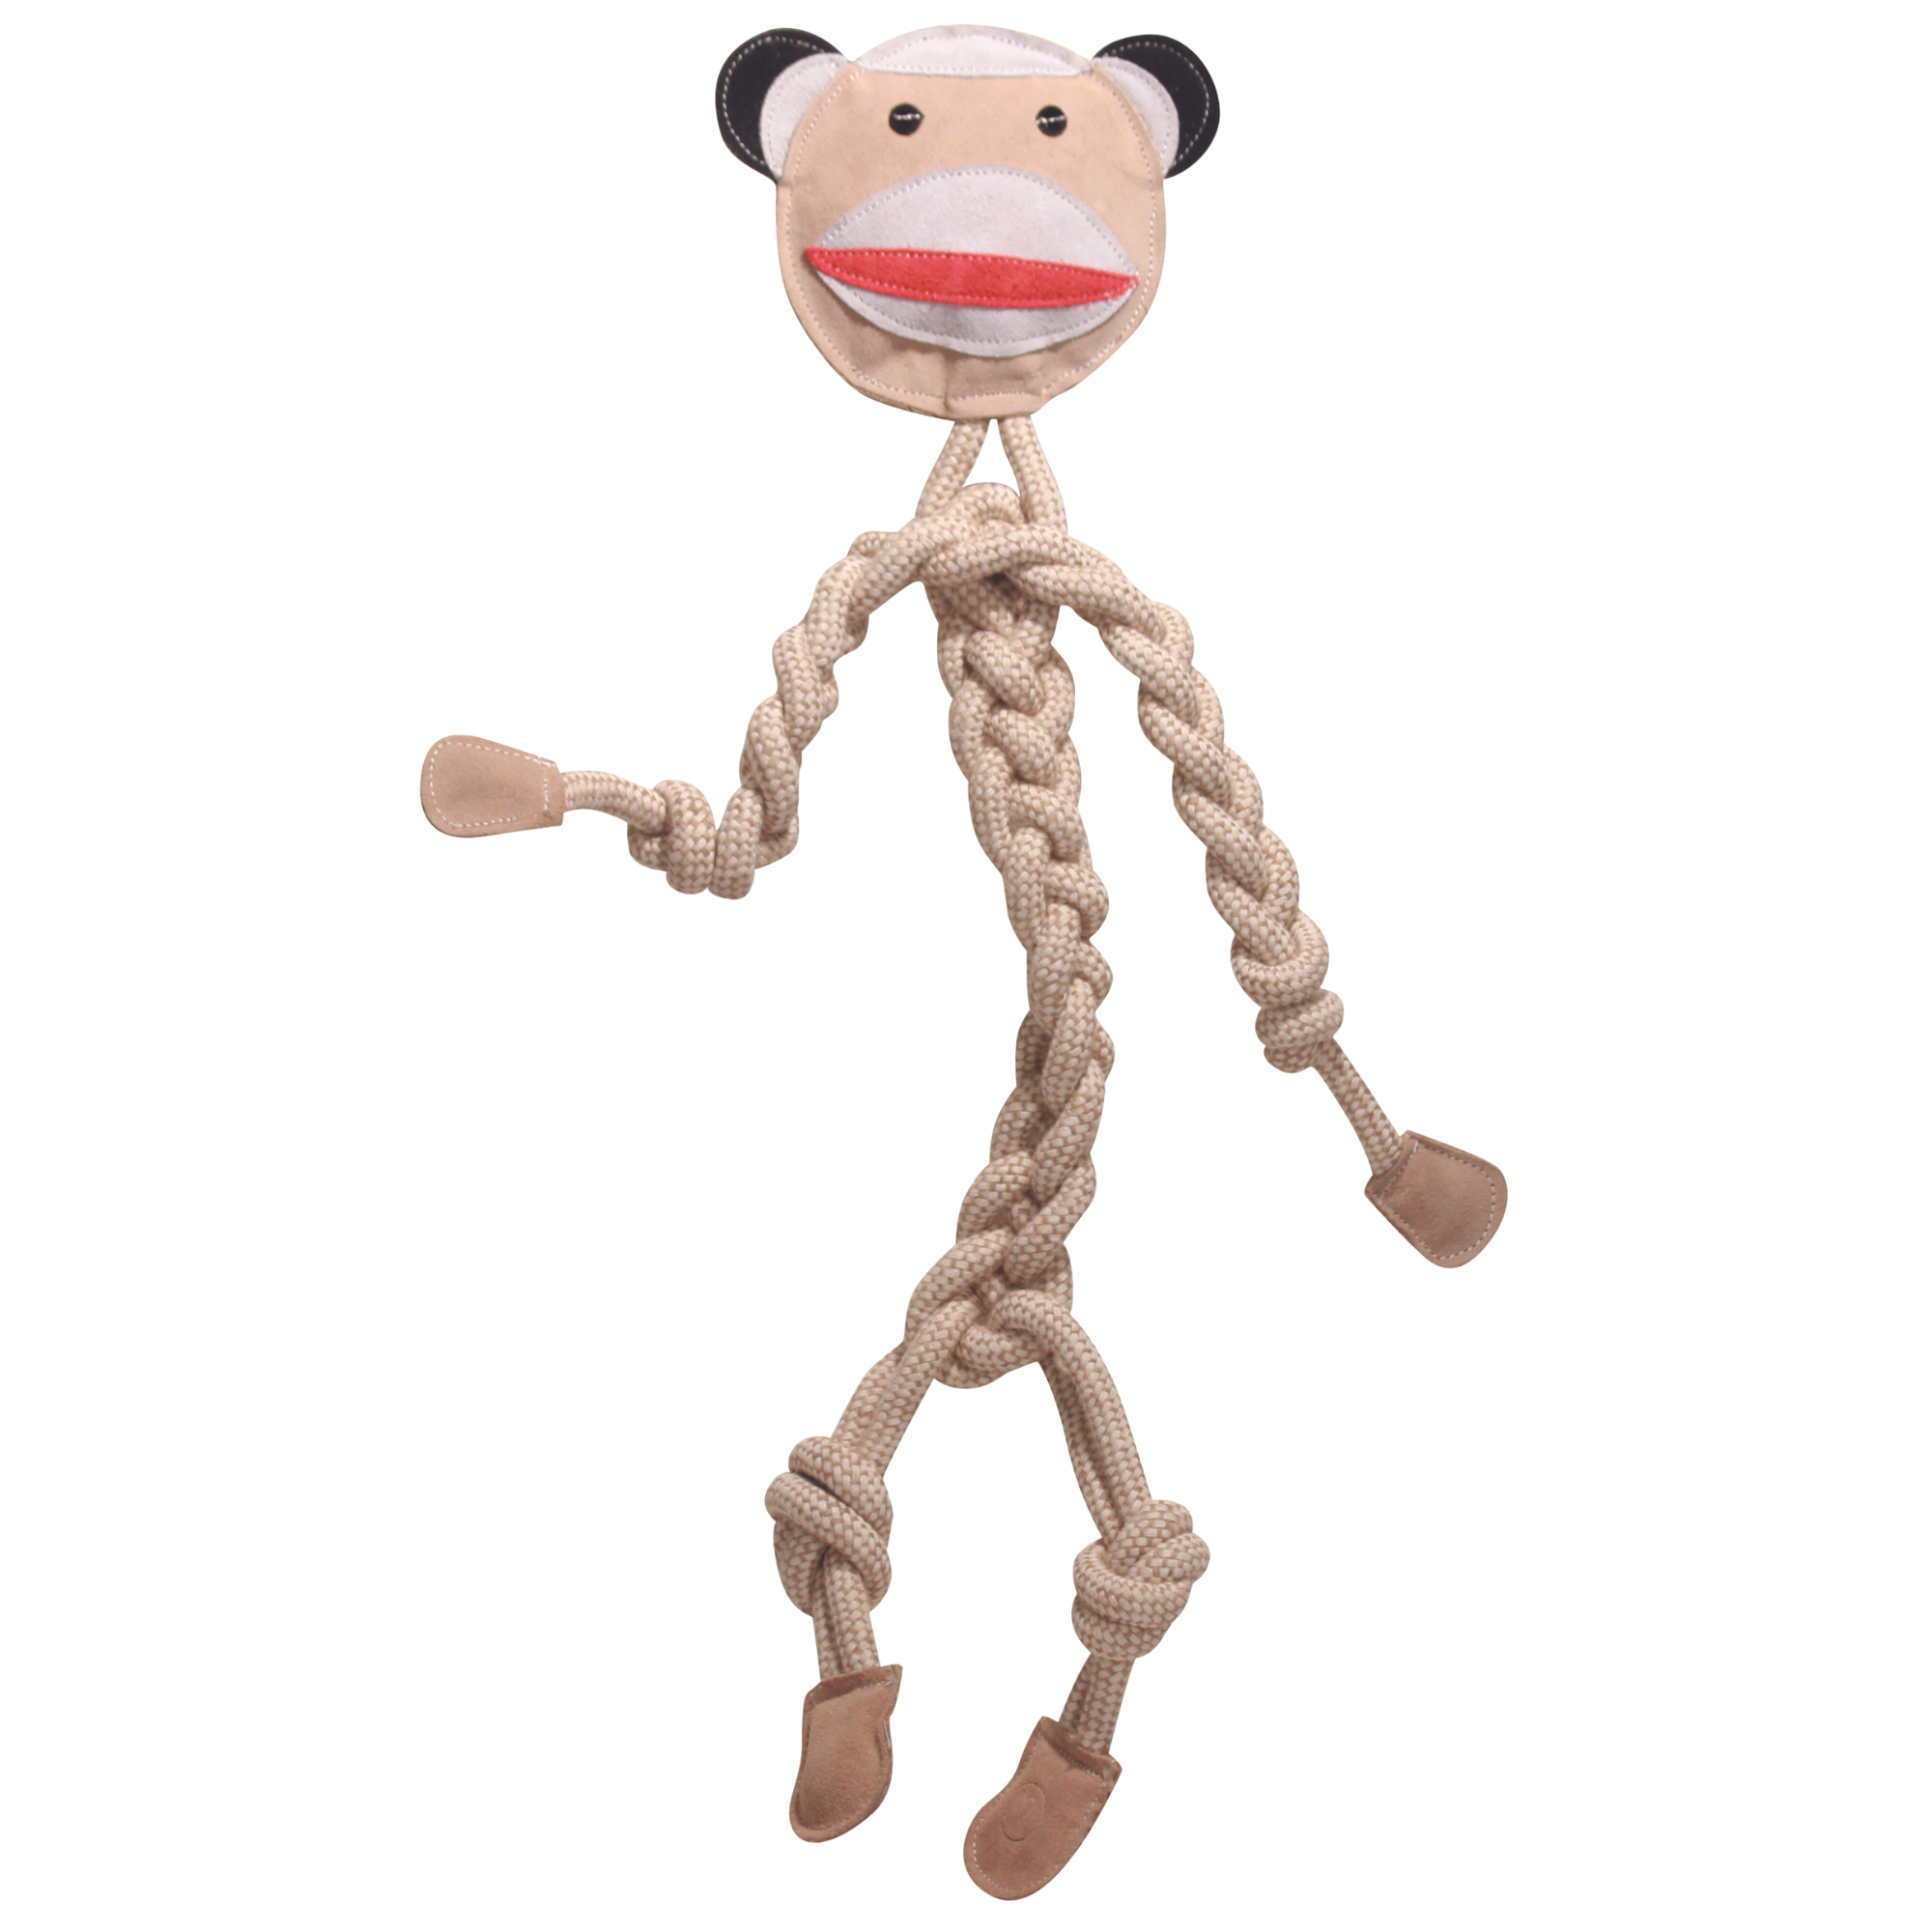 Large Stuey the Sock Money Rope Dog toy. Stuey has a light pink face, with black and white ears, and red lips. Stuey has light pink leather hands and feet, with rope knotted legs, arms, and body. Stuey is made out of natrual cotton, hemp, leather, coconut fiber materials, and has natrual dyes. 